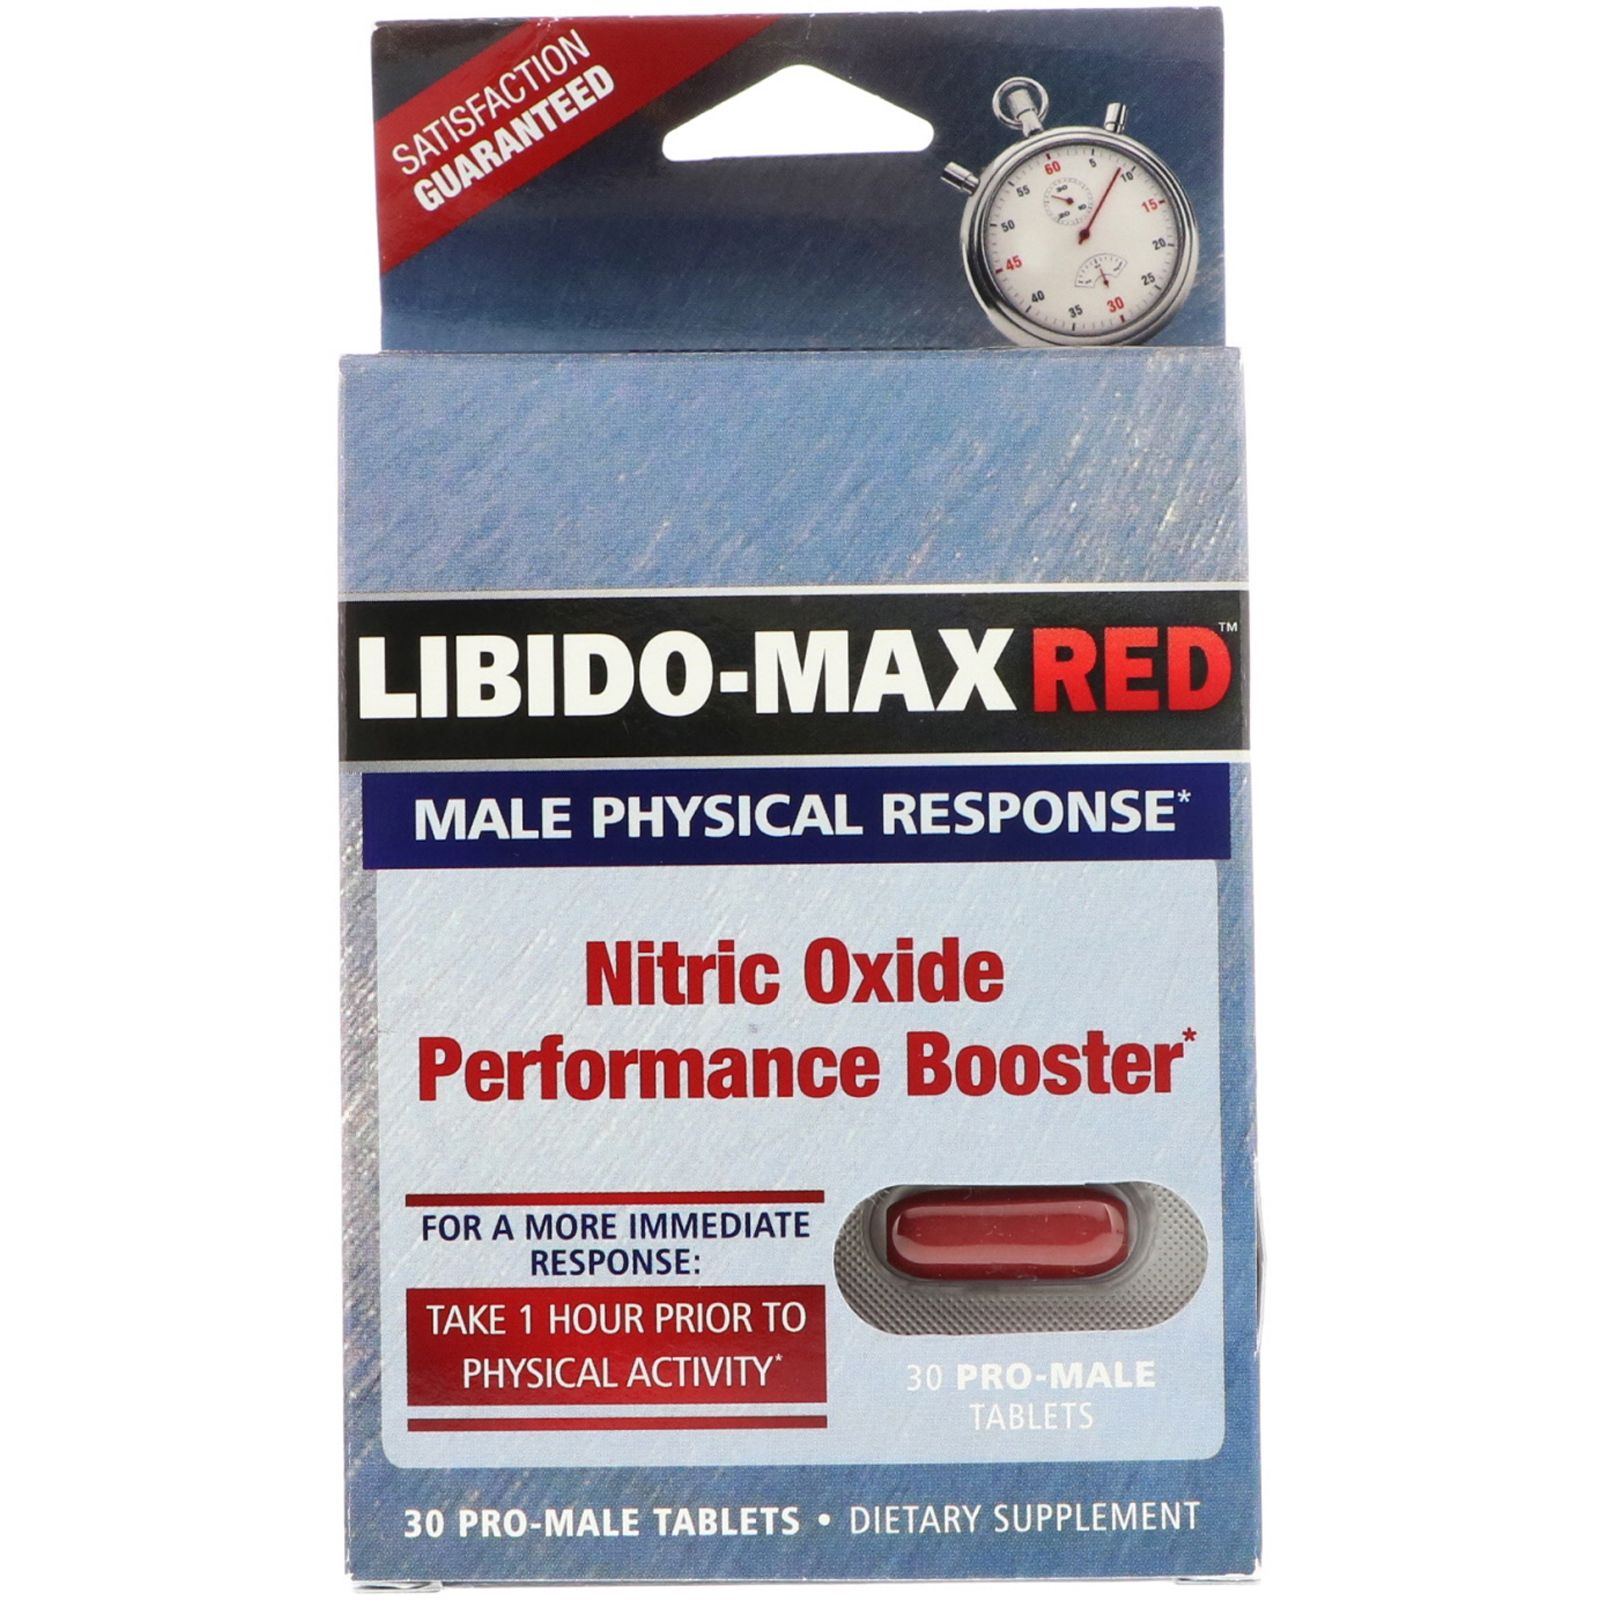 appliednutrition Libido-Max Red 30 Pro-Male Tablets